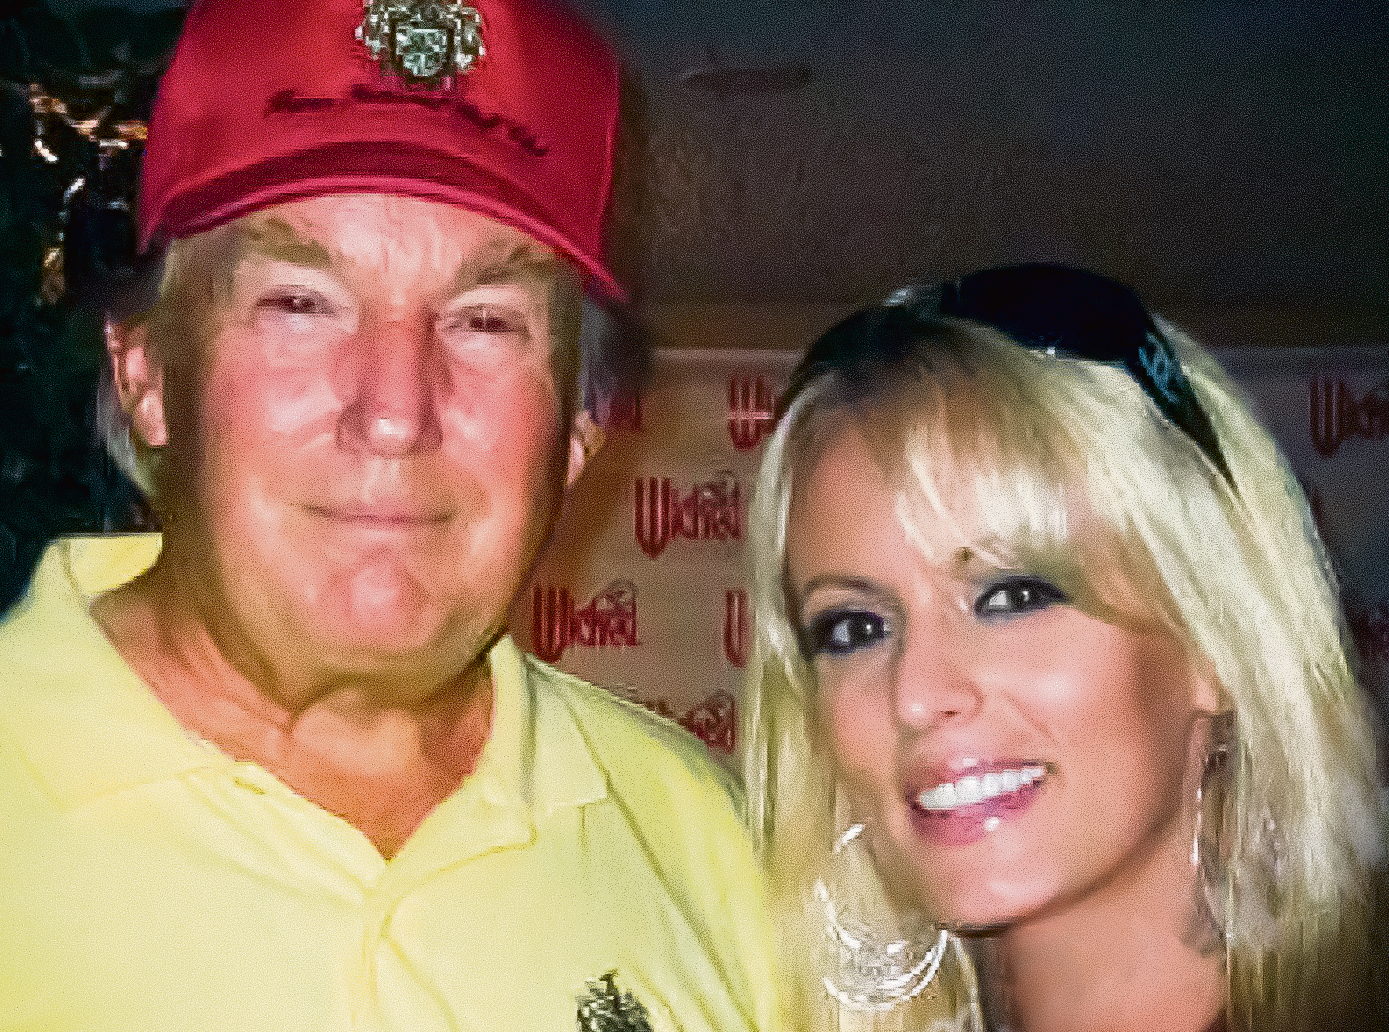 Trump with Daniels around the time of the falsified business records